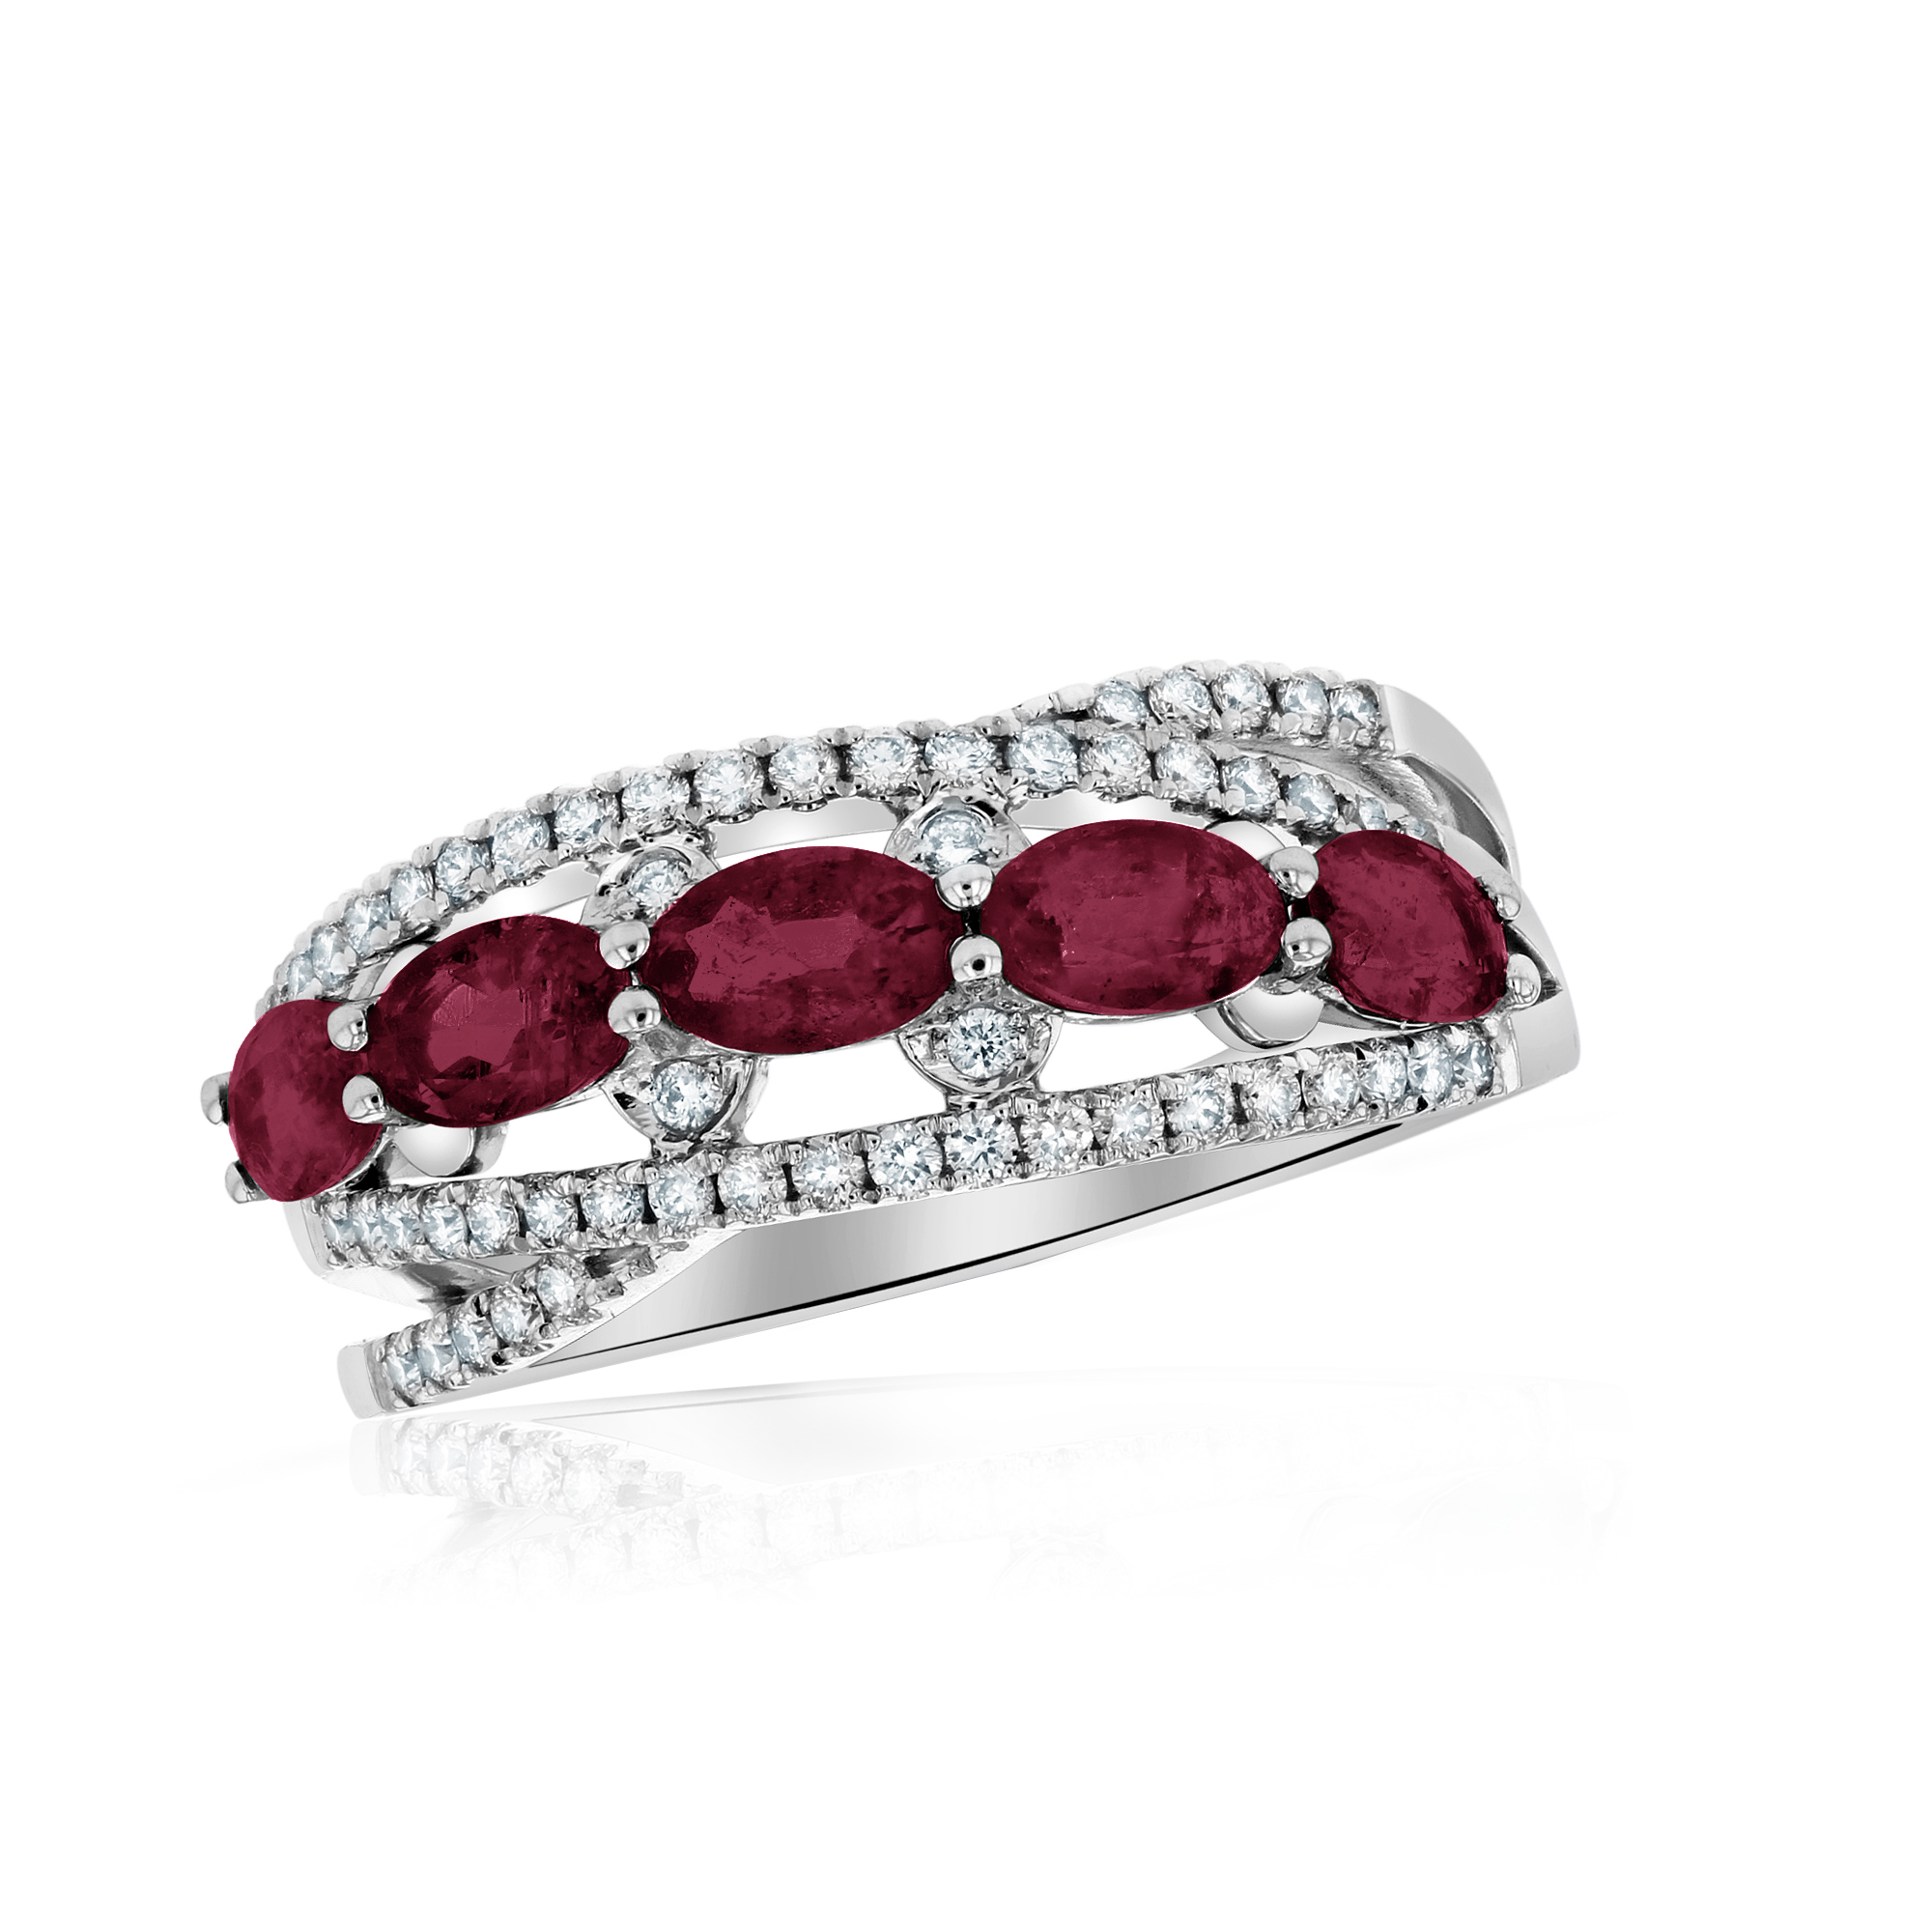 View 0.31ctw Diamond and Ruby Ring in 14k White Gold